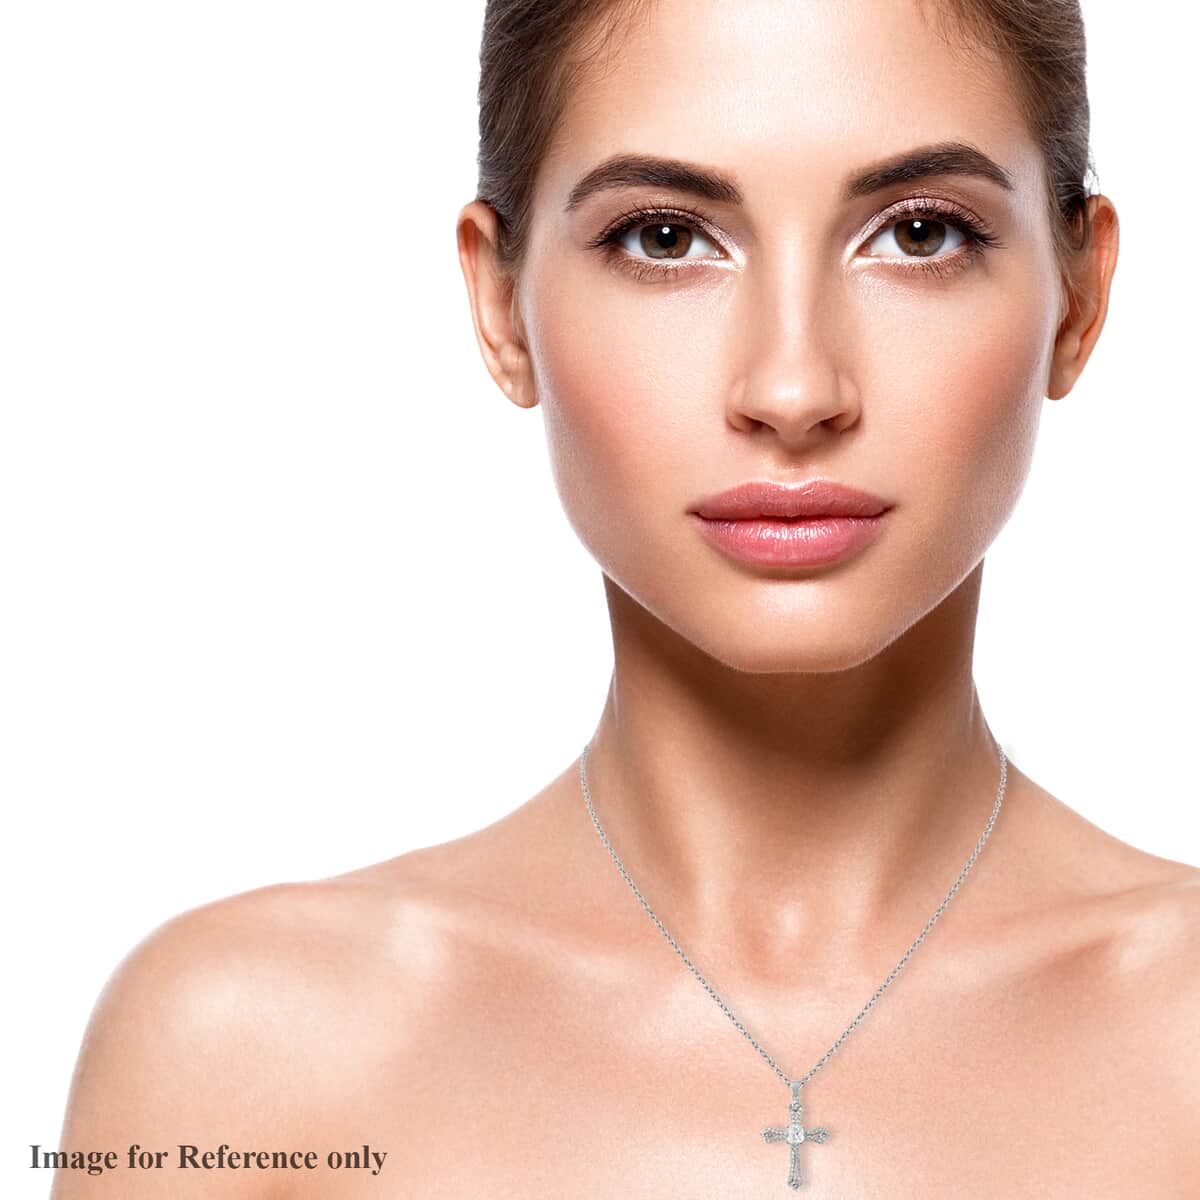 Simulated Diamond Cross Pendant Necklace 20 Inch in Goldtone and ION Plated YG Stainless Steel image number 2